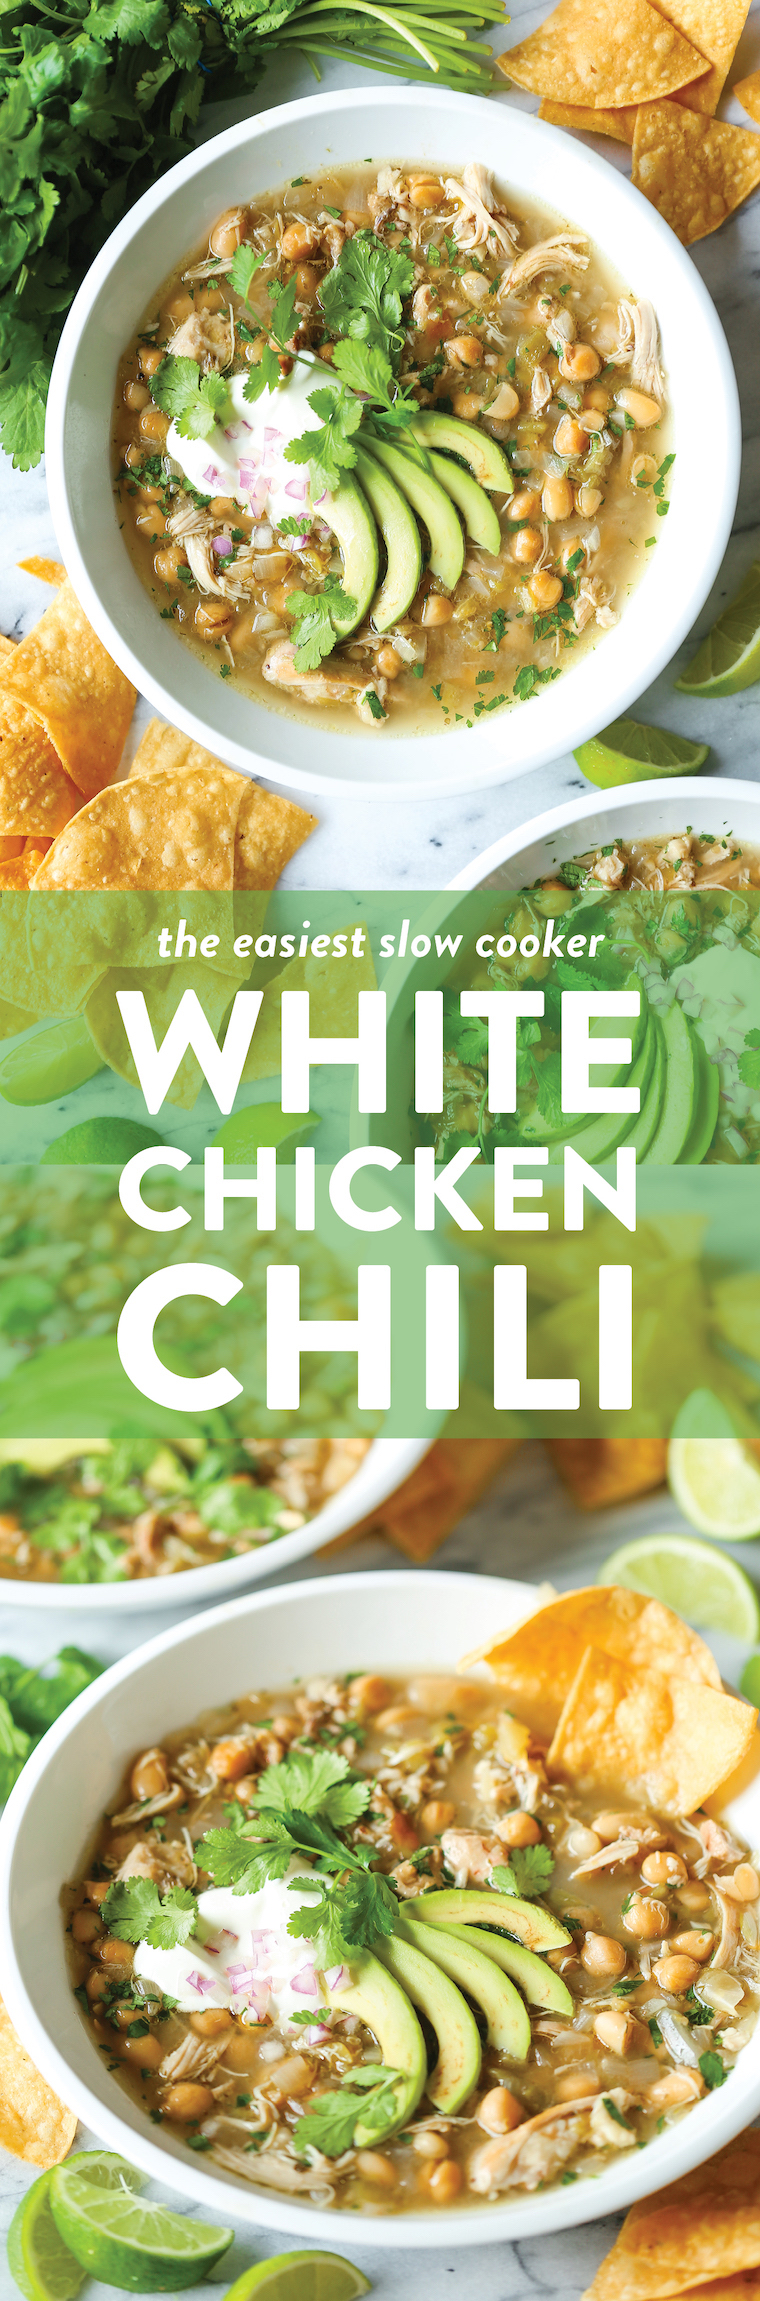 Slow Cooker White Chicken Chili - The easiest crockpot recipe of your life! It's a one pot wonder - no searing, no fuss. Simply throw everything right in!